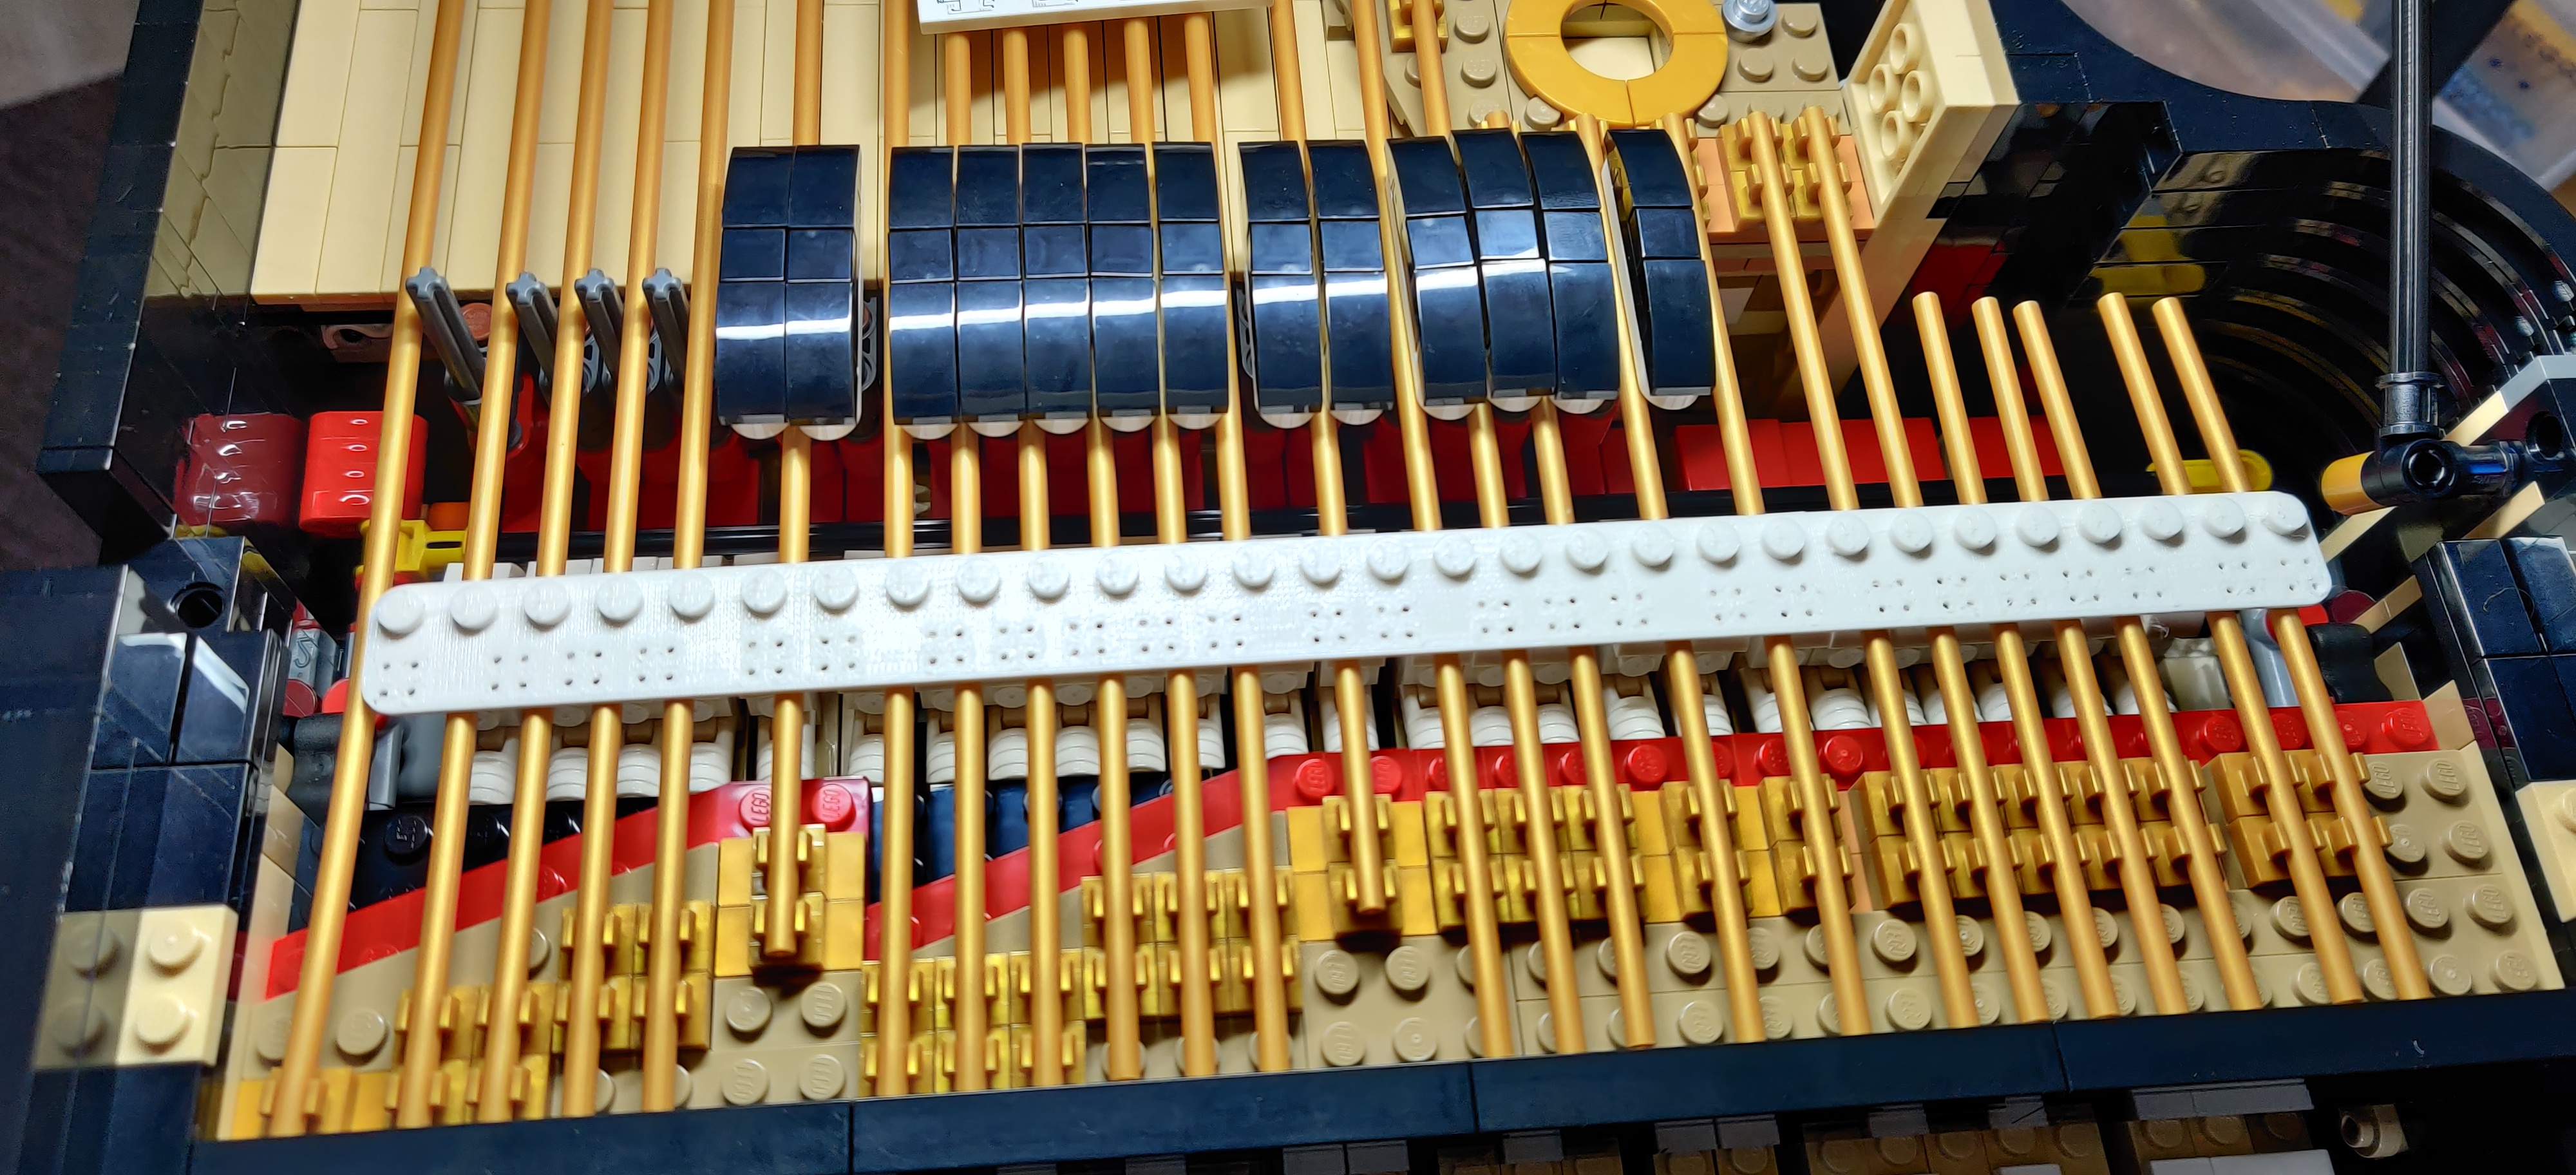 white plastic 3D-printer rectangle, 29×2 Lego studs in size,
with 25 groups of 4 small holes to hold the sensors, placed
on top of the "strings" on the piano, showing how the holes
for the sensors align with the hammers